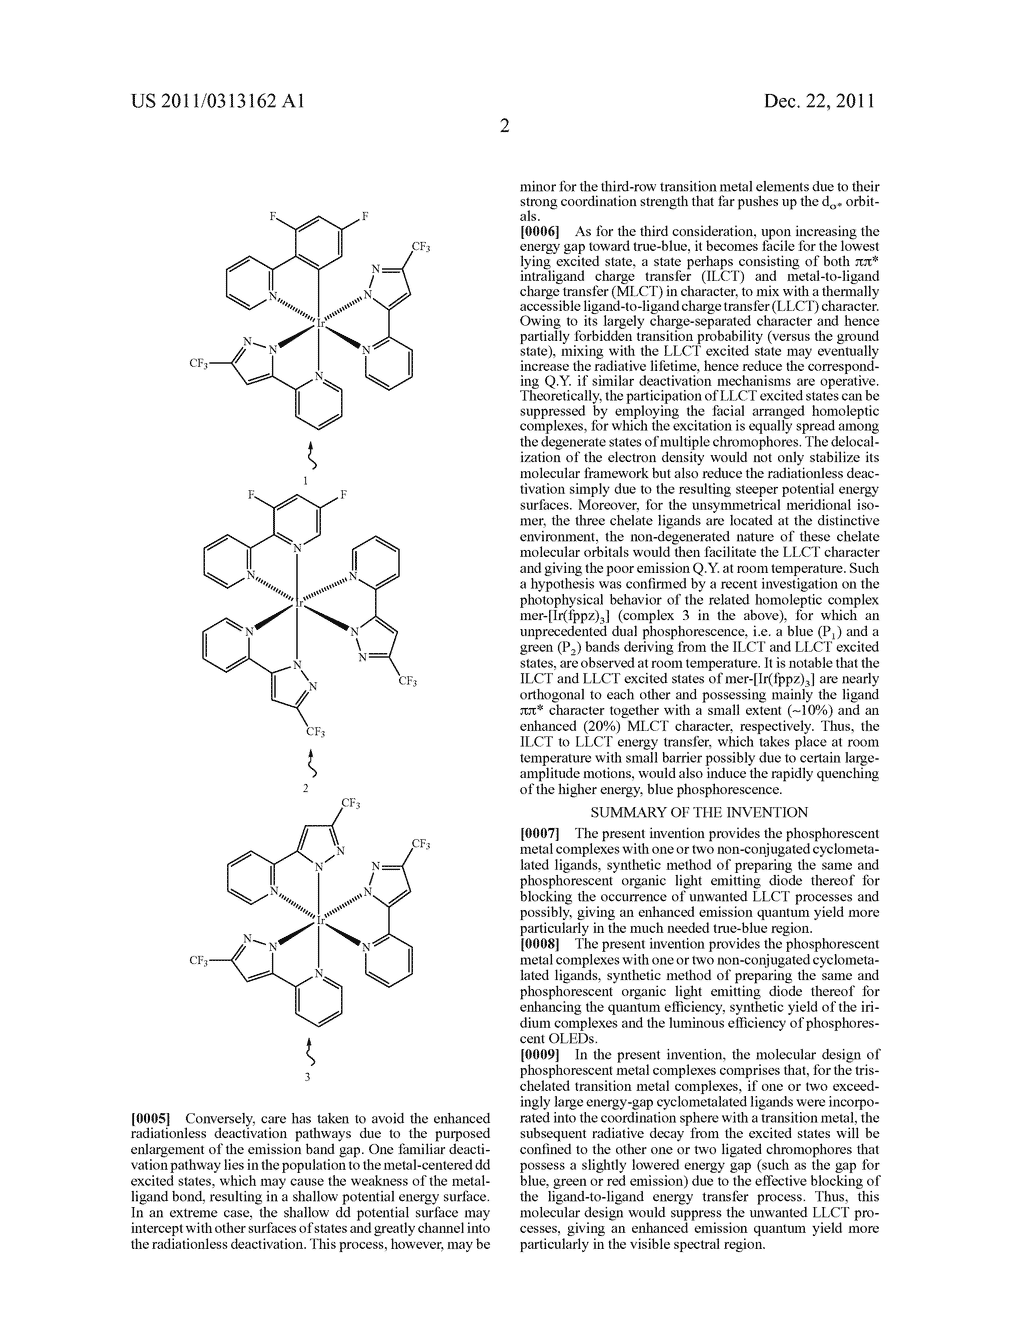 PHOSPHORESCENT IRIDIUM COMPLEX WITH NON-CONJUGATED CYCLOMETALATED LIGANDS,     SYNTHETIC METHOD OF PREPARING THE SAME AND PHOSPHORESCENT ORGANIC LIGHT     EMITTING DIODE THEREOF - diagram, schematic, and image 03